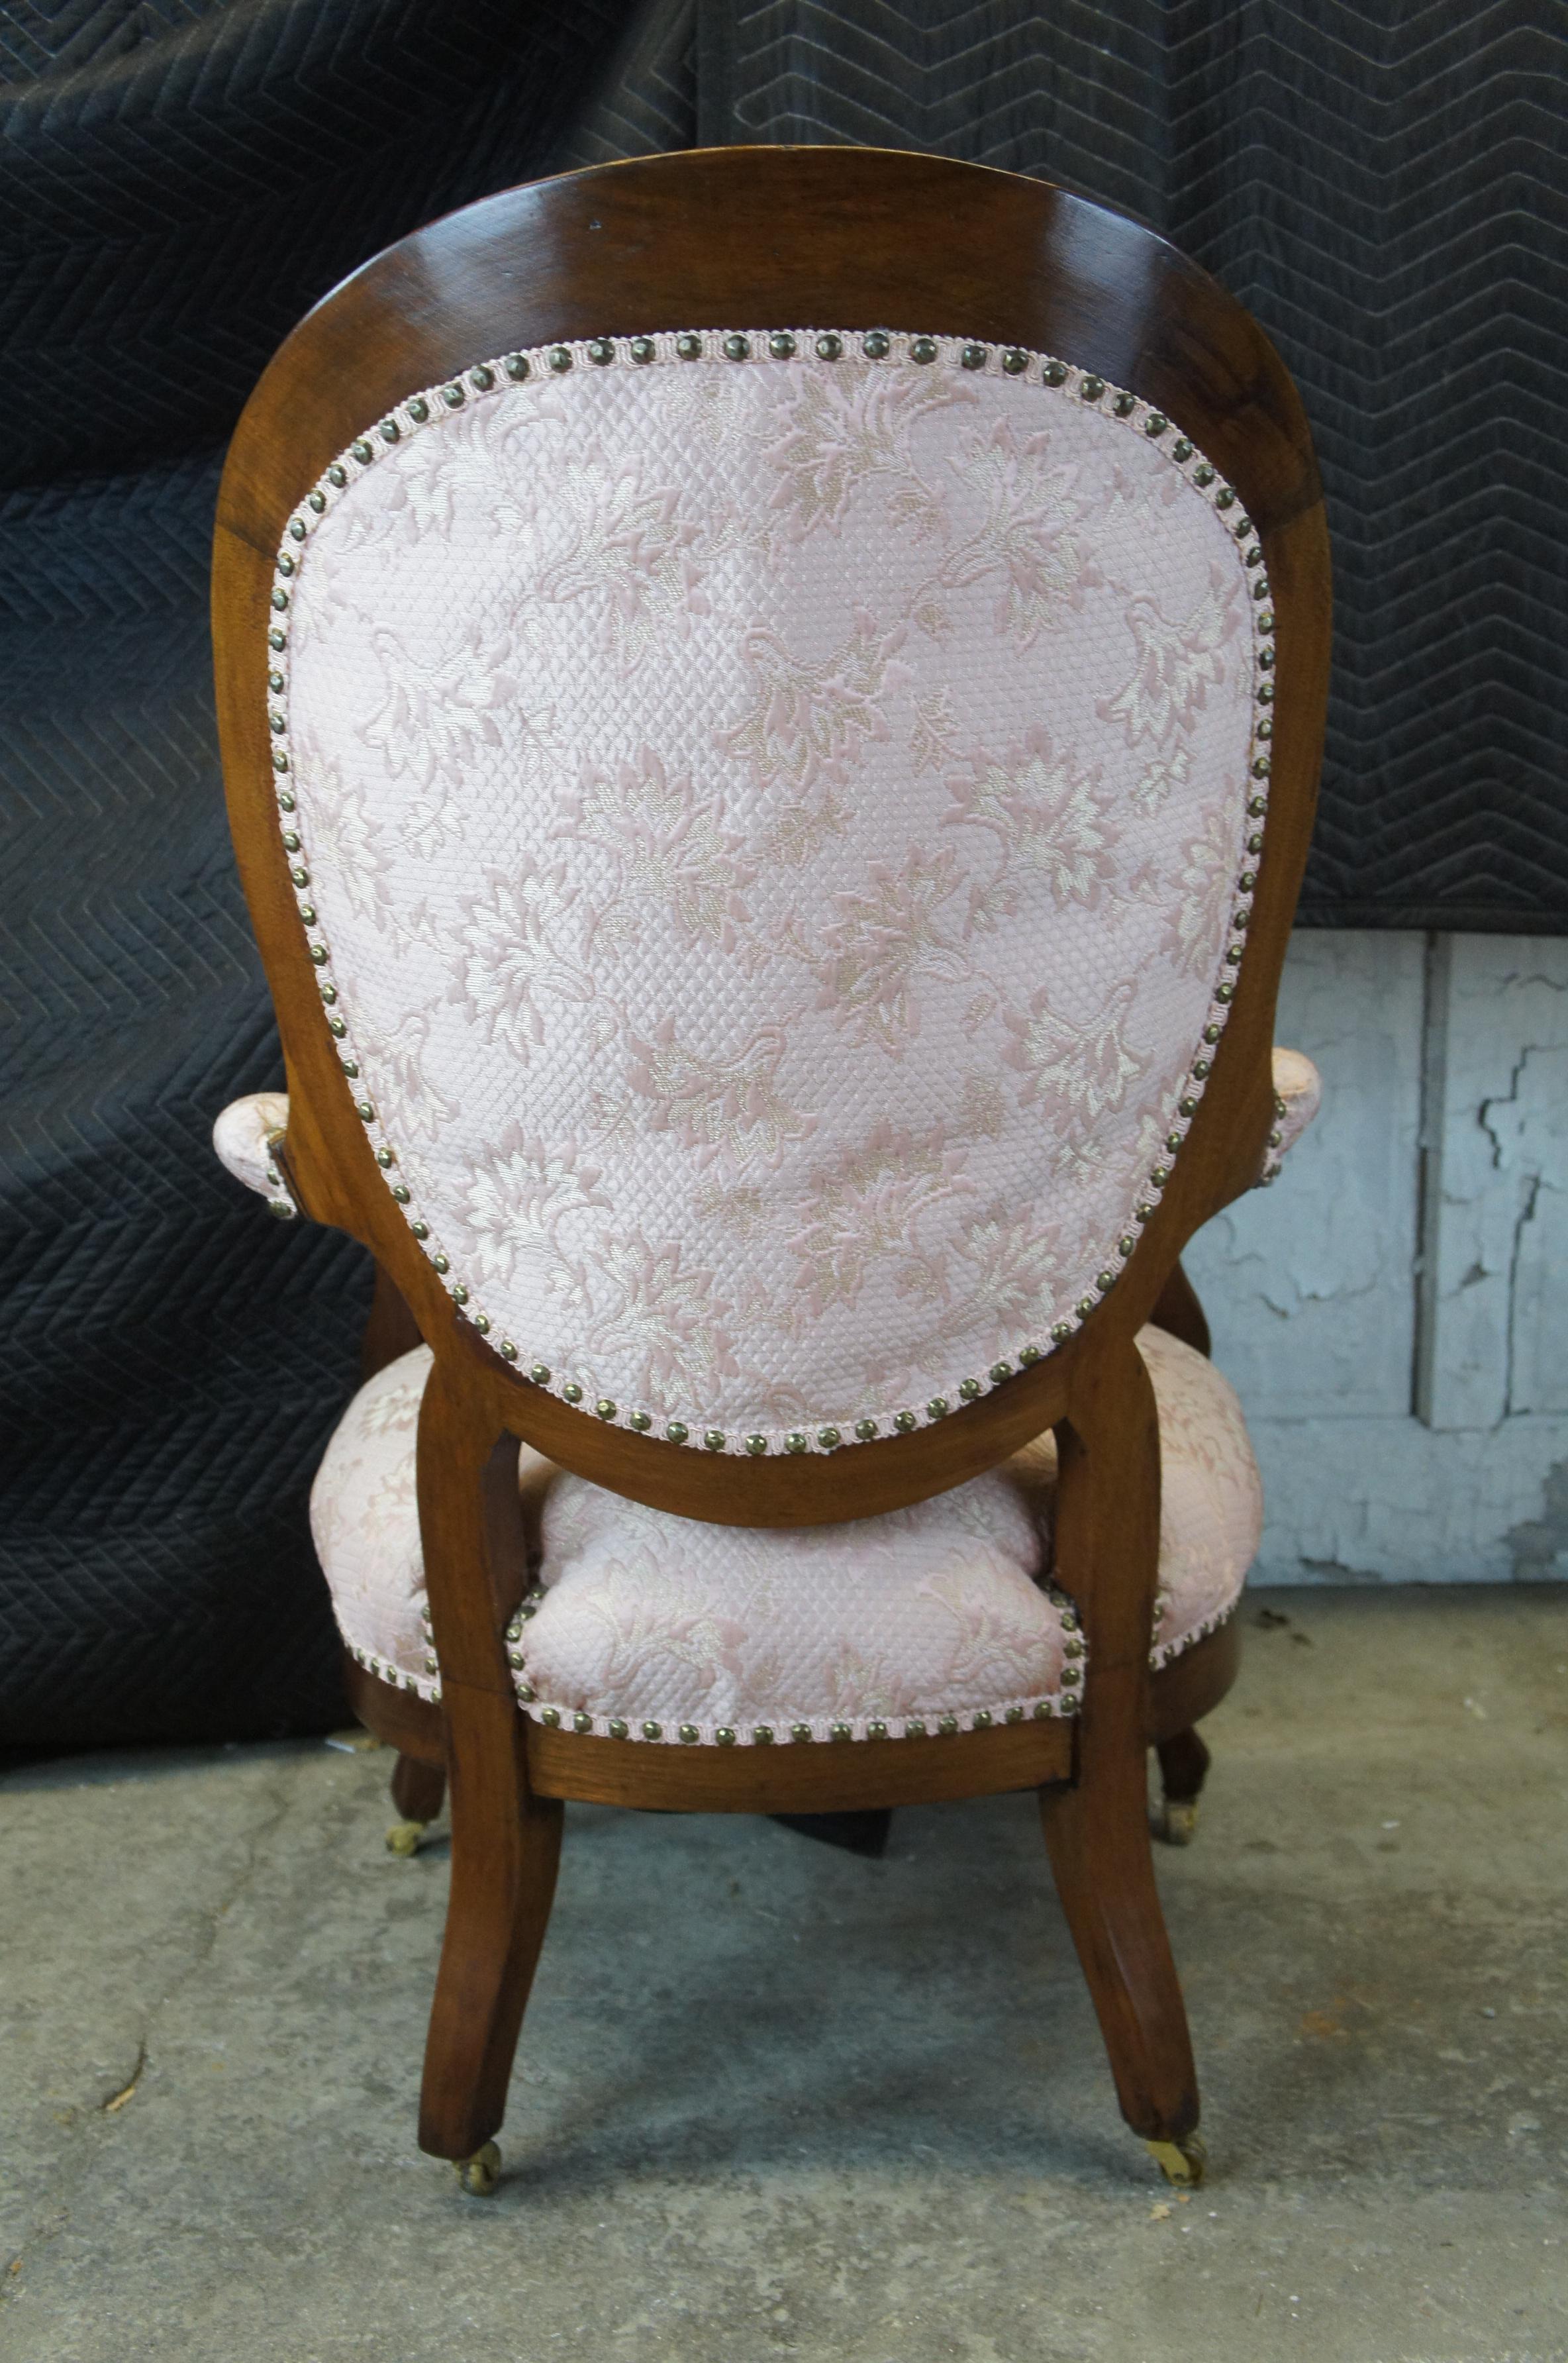 Upholstery 2 Antique Victorian Balloon Back Serpentine Walnut Parlor Arm Chairs Pink Tufted